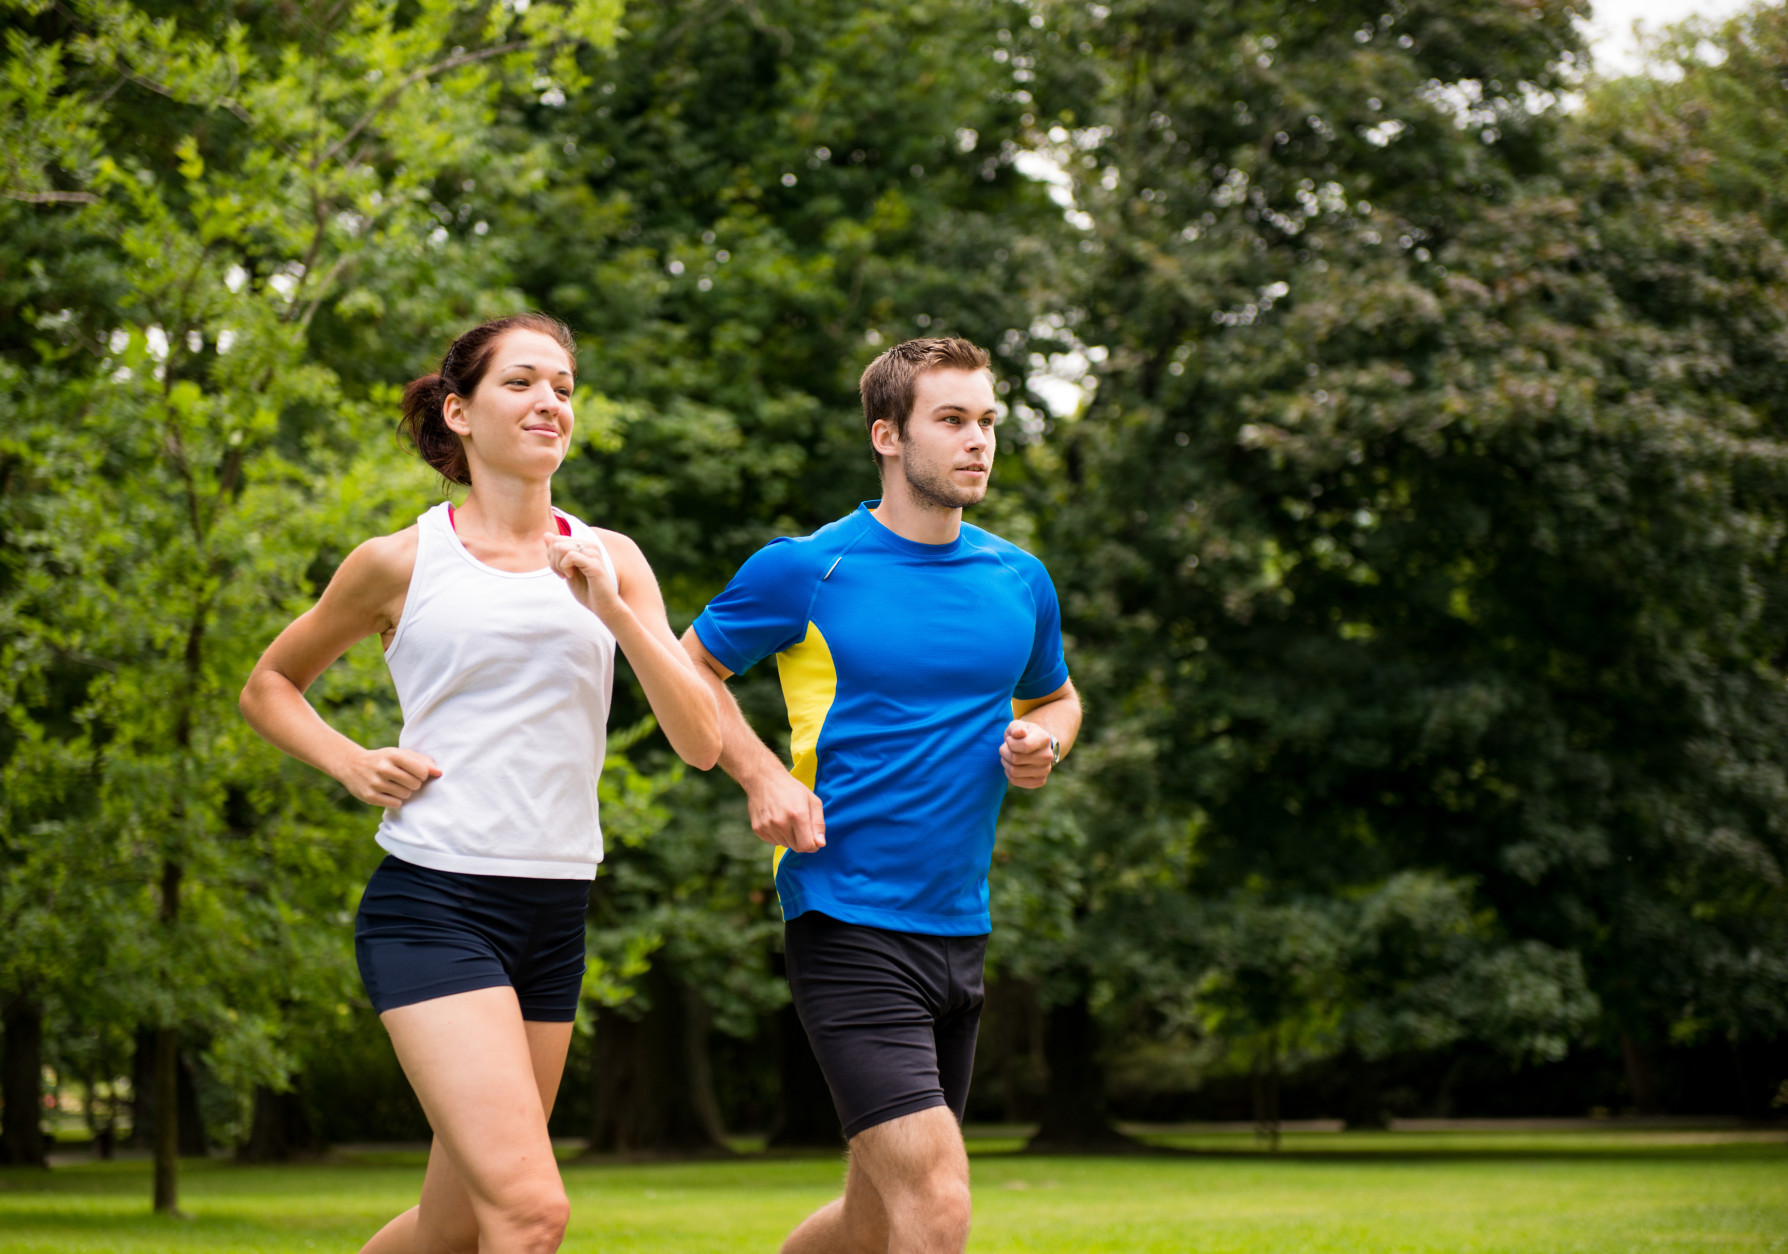 Fitness couple - young man and woman jogging outdoor in nature